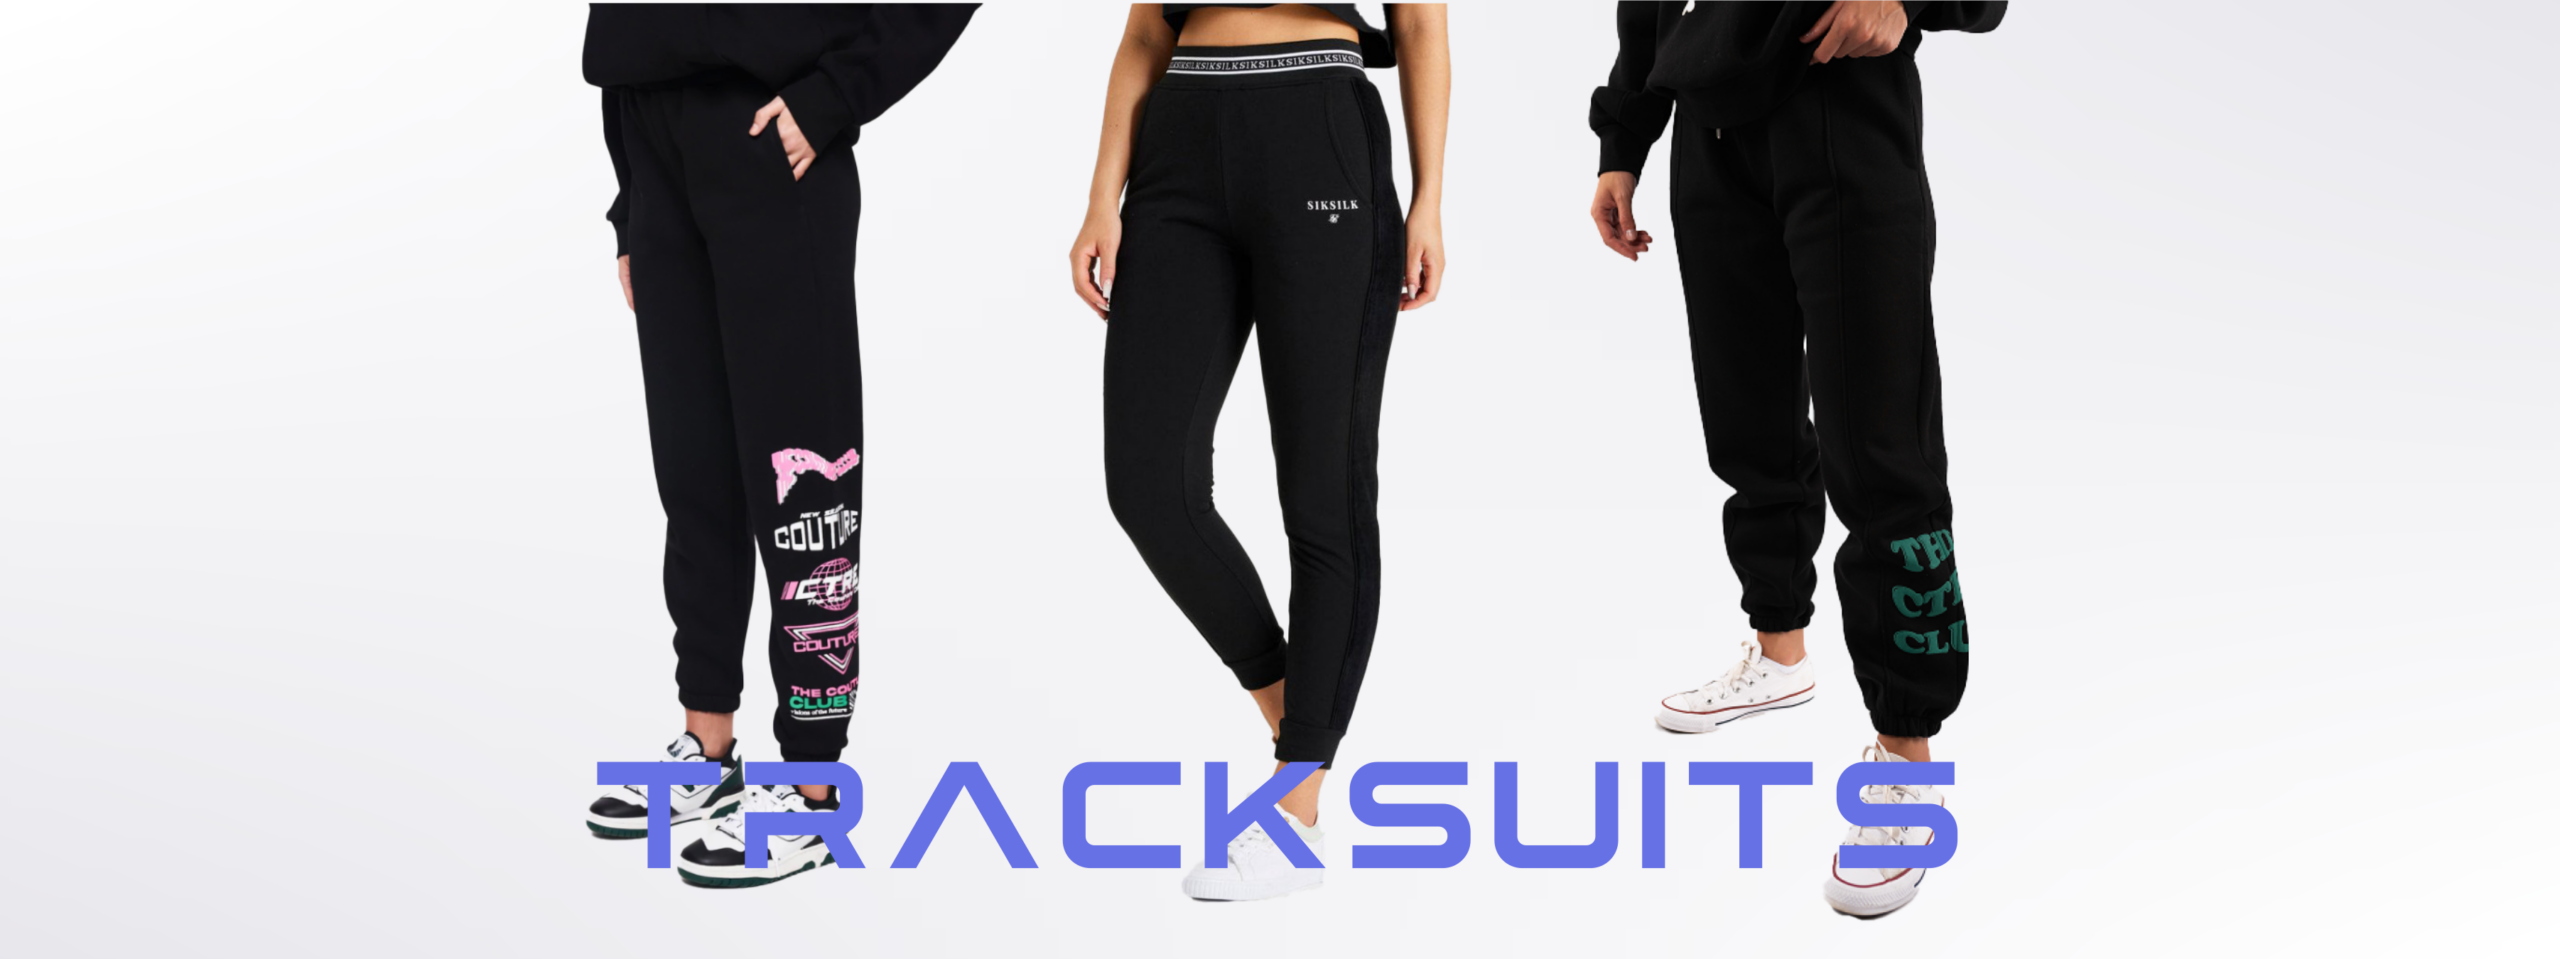 TRACKSUITS2.png